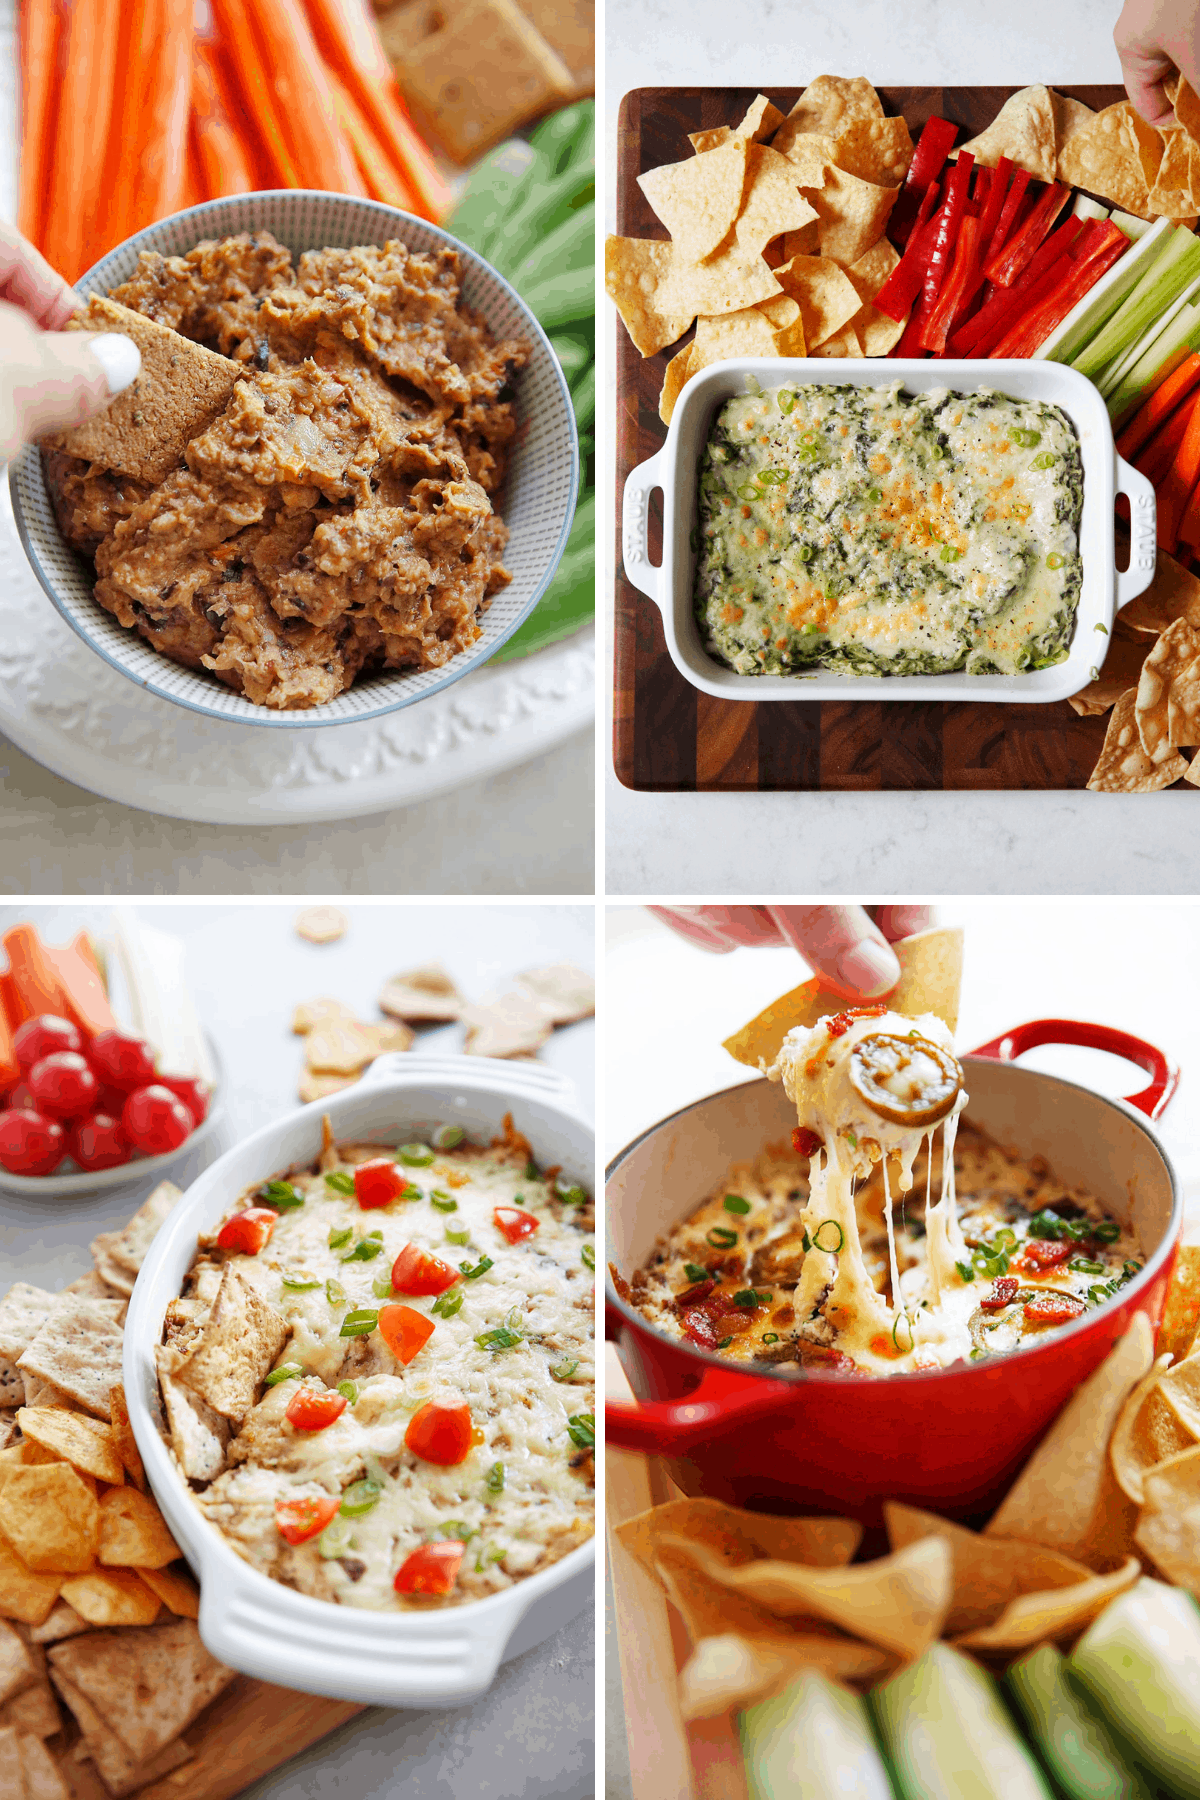 Healthy snack recipes to dip.